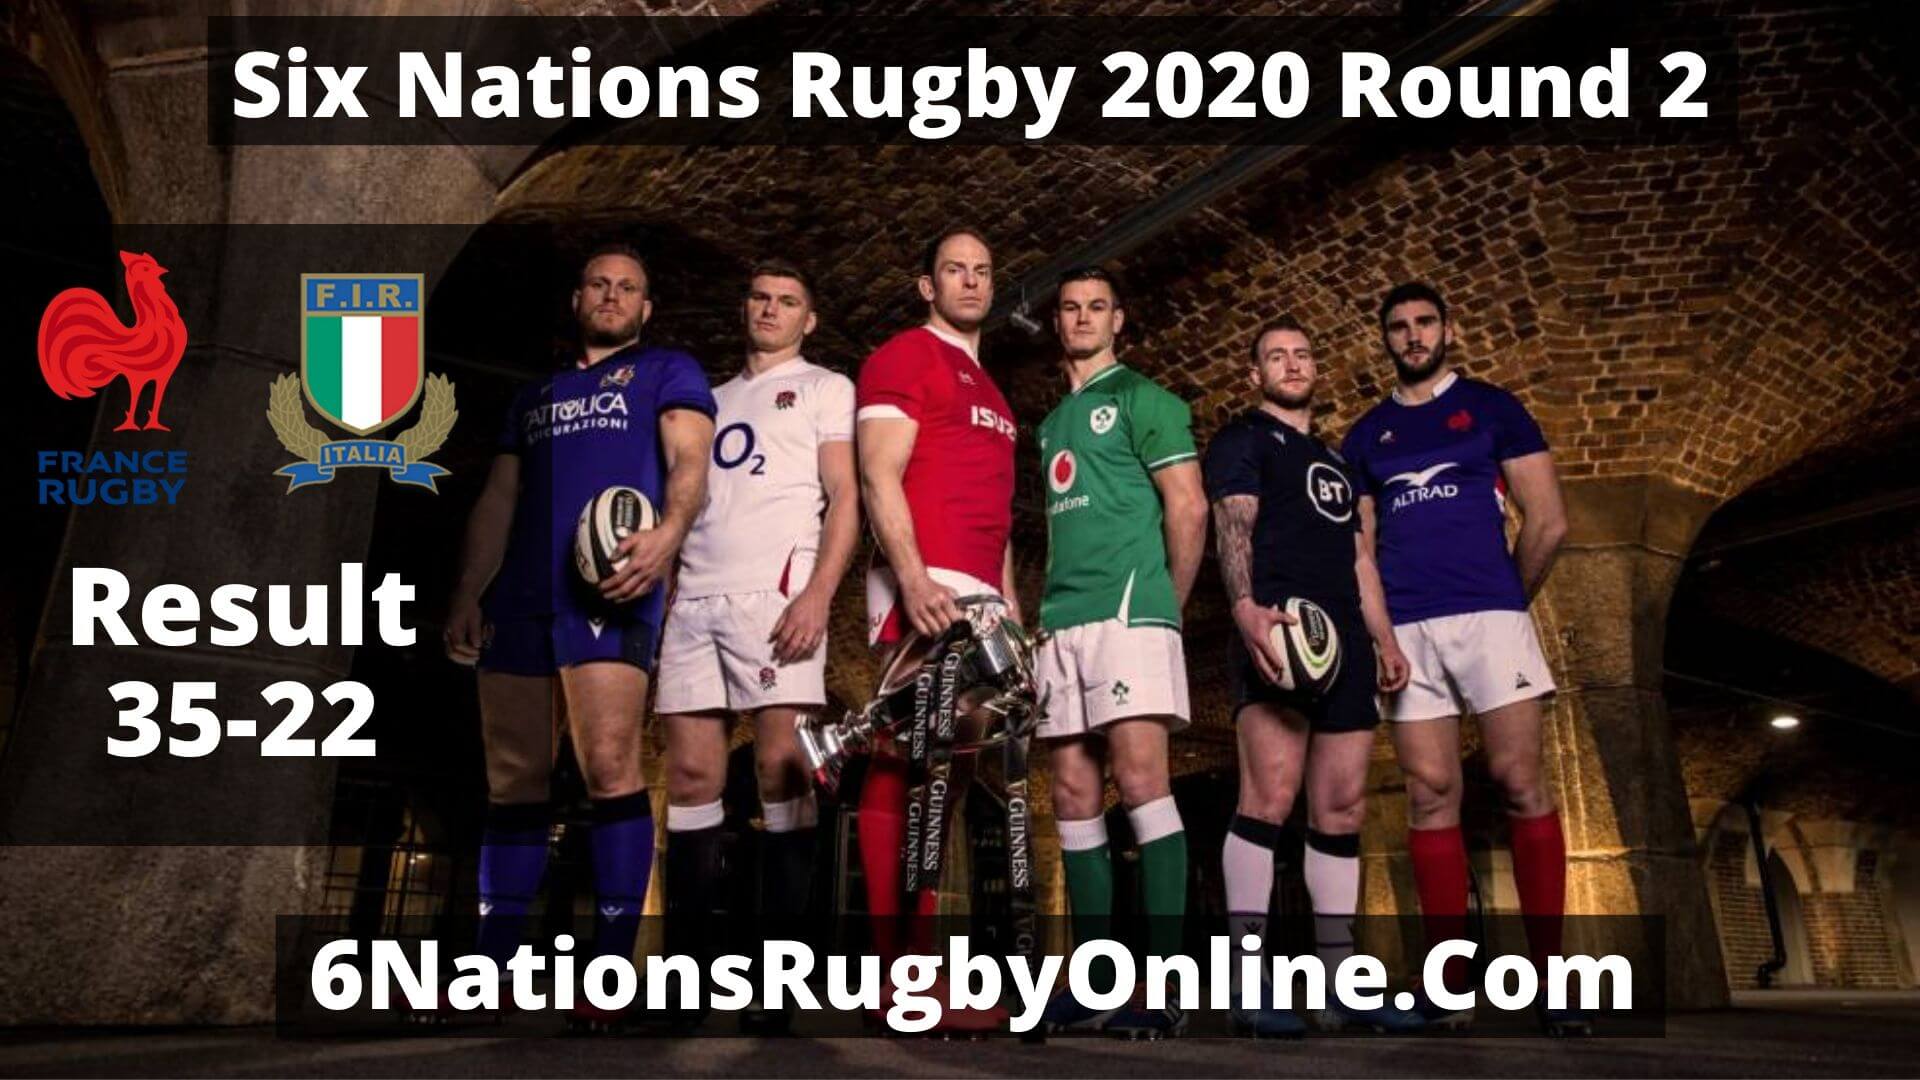 Italy Vs France Result 2020 Rd 2 | Six Nations Rugby